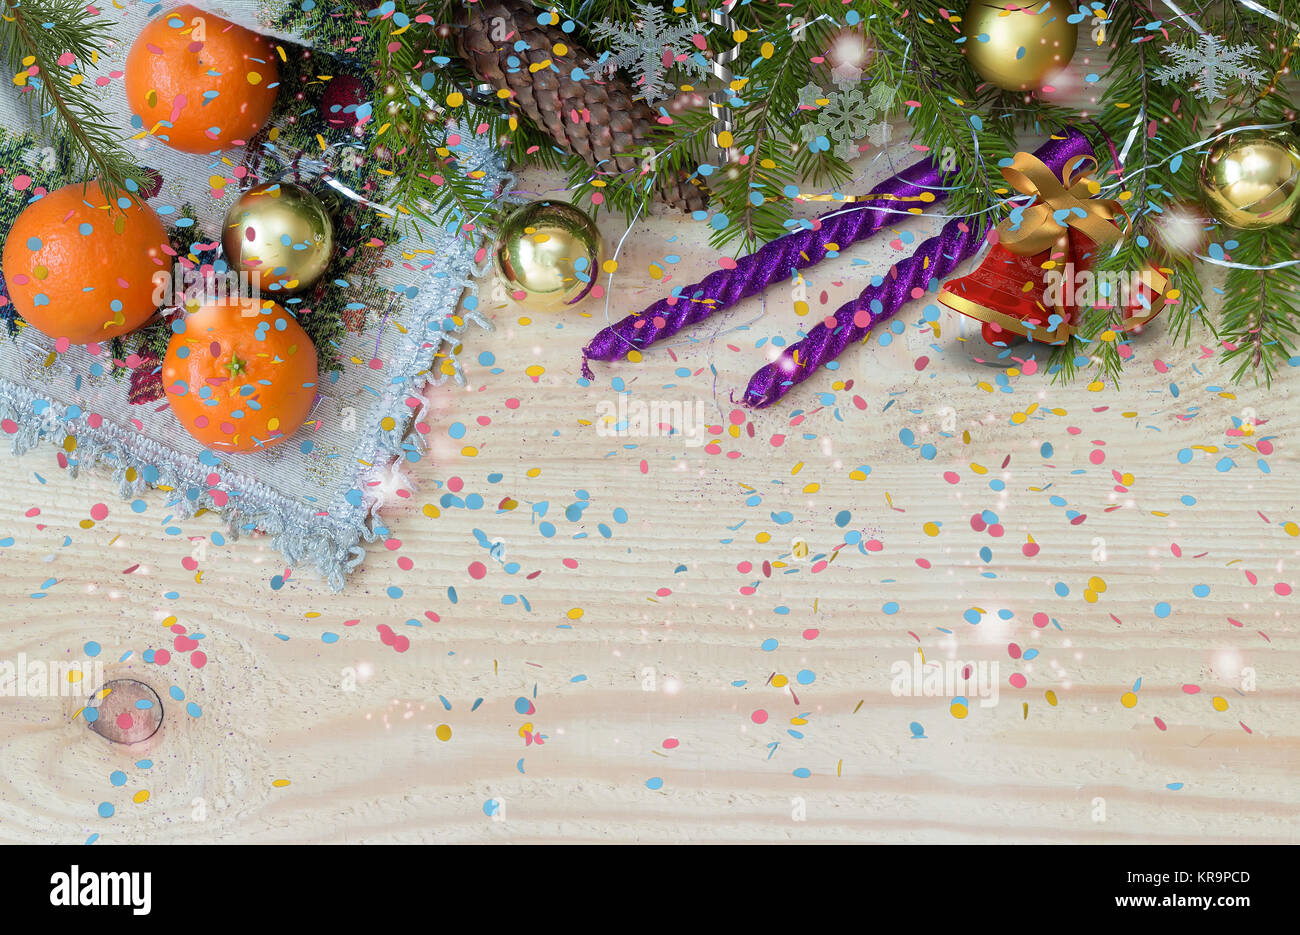 Christmas and New year decoration for the holiday. Stock Photo